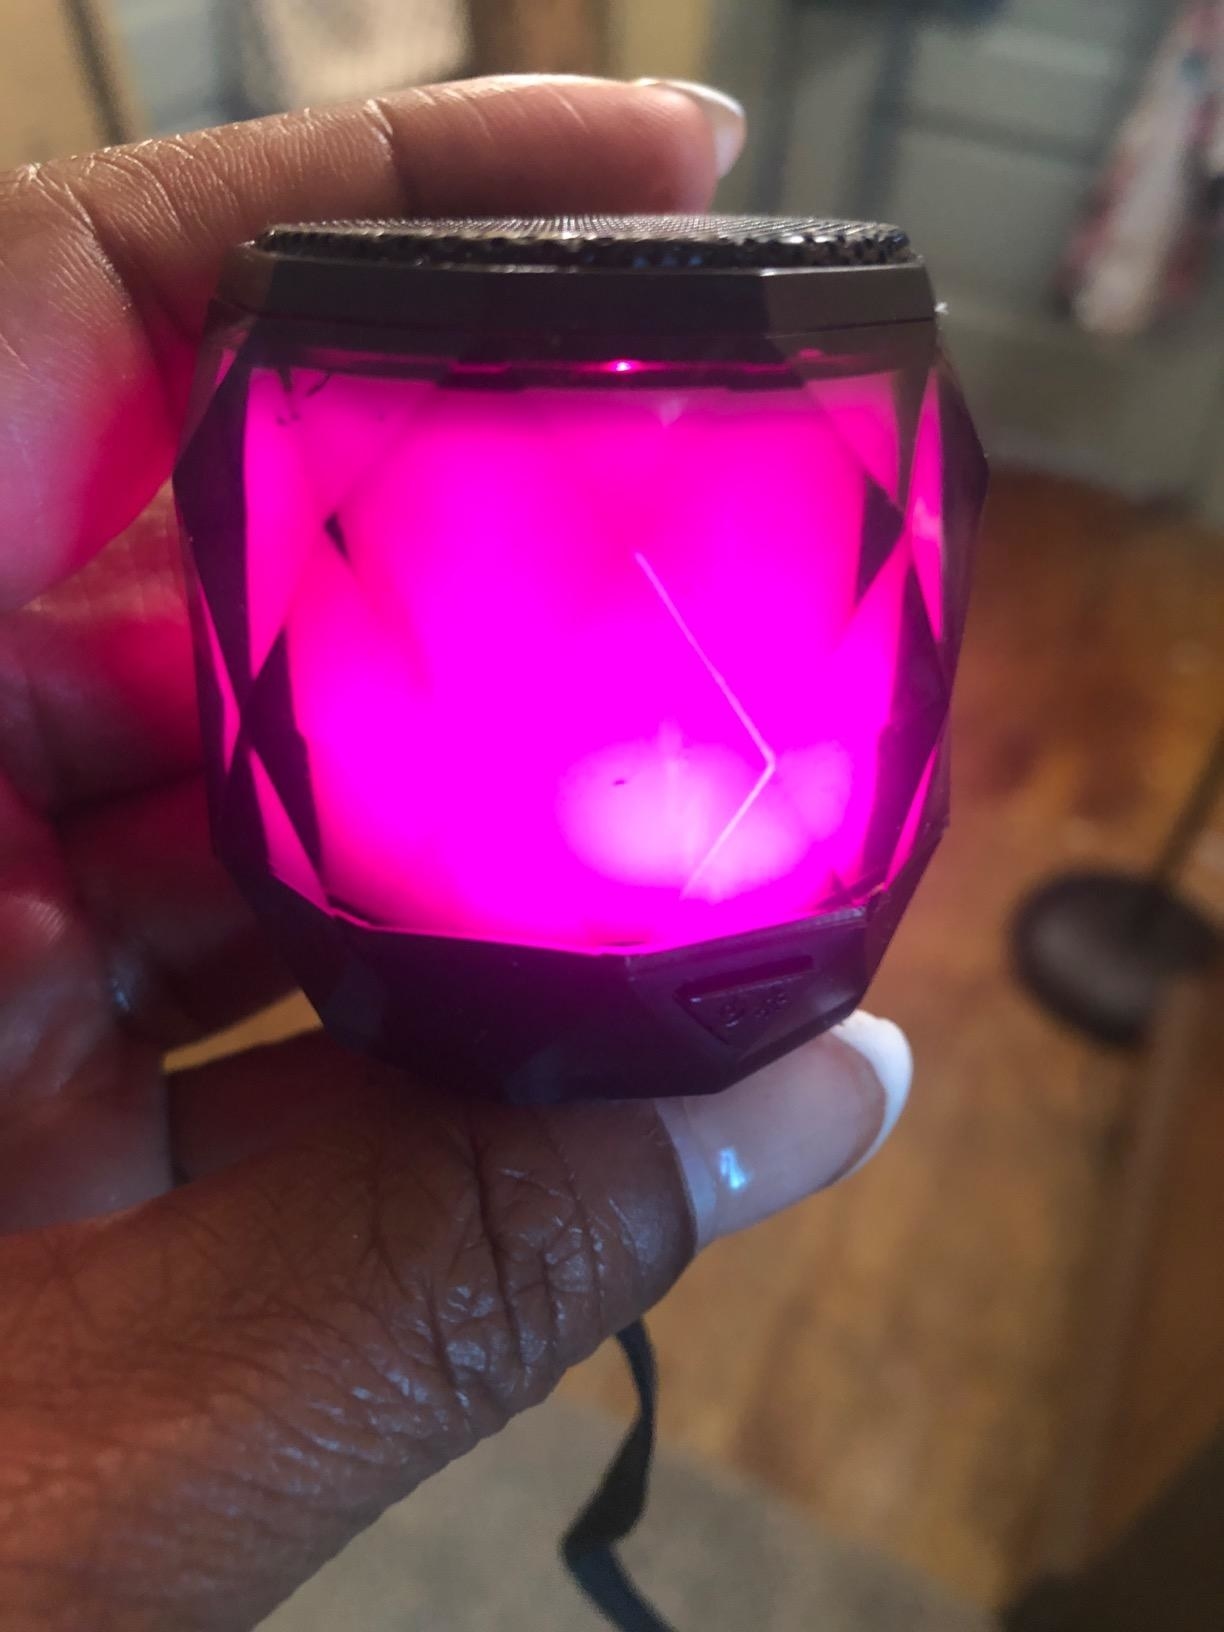 close up of reviewer holding up the portable speaker with lights turned neon fuschia